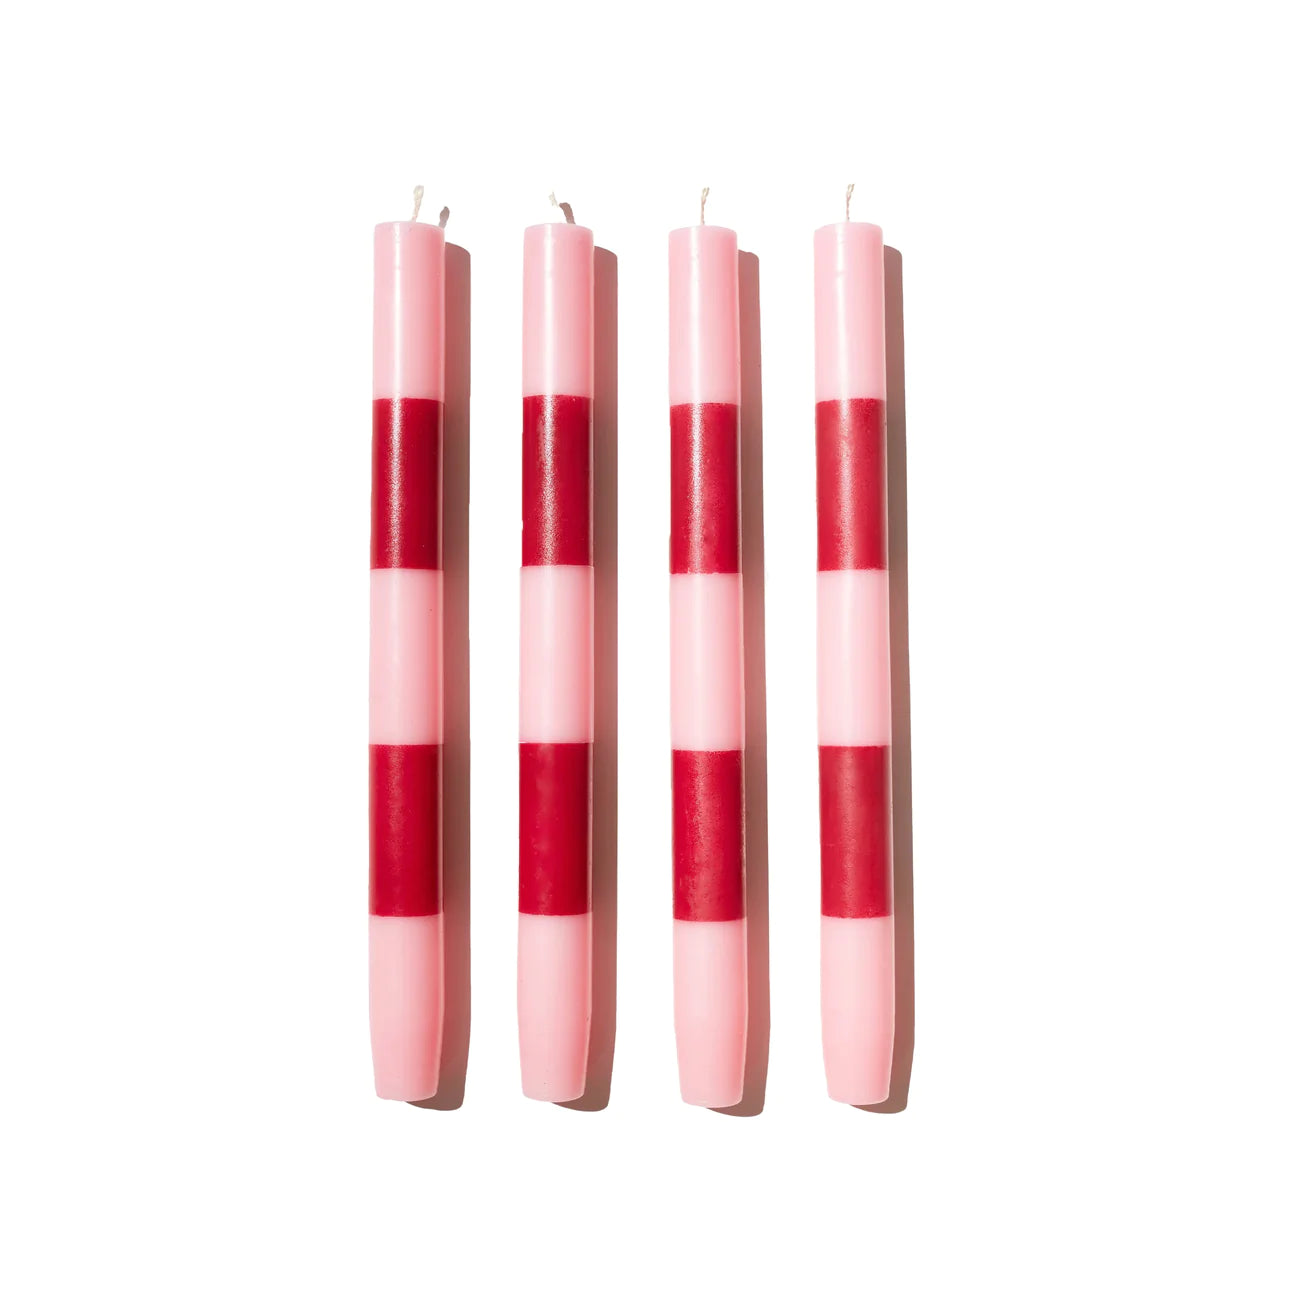 Striped Candles - 4 pack